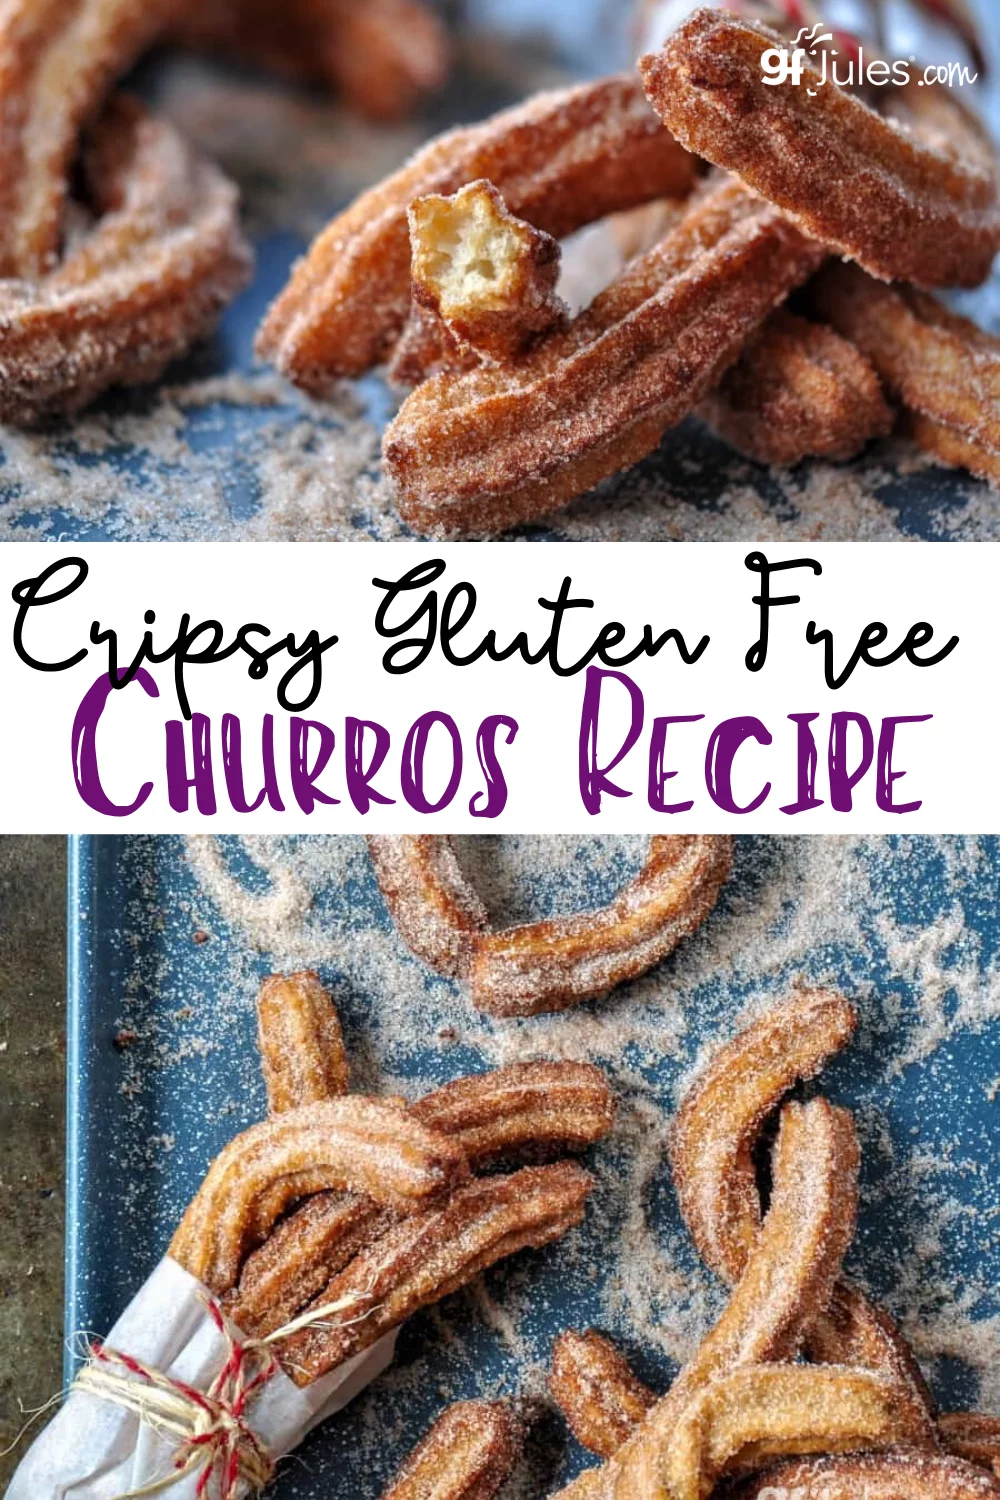 Gluten Free Churros Recipe - easy, light and airy made with gfJules Flour